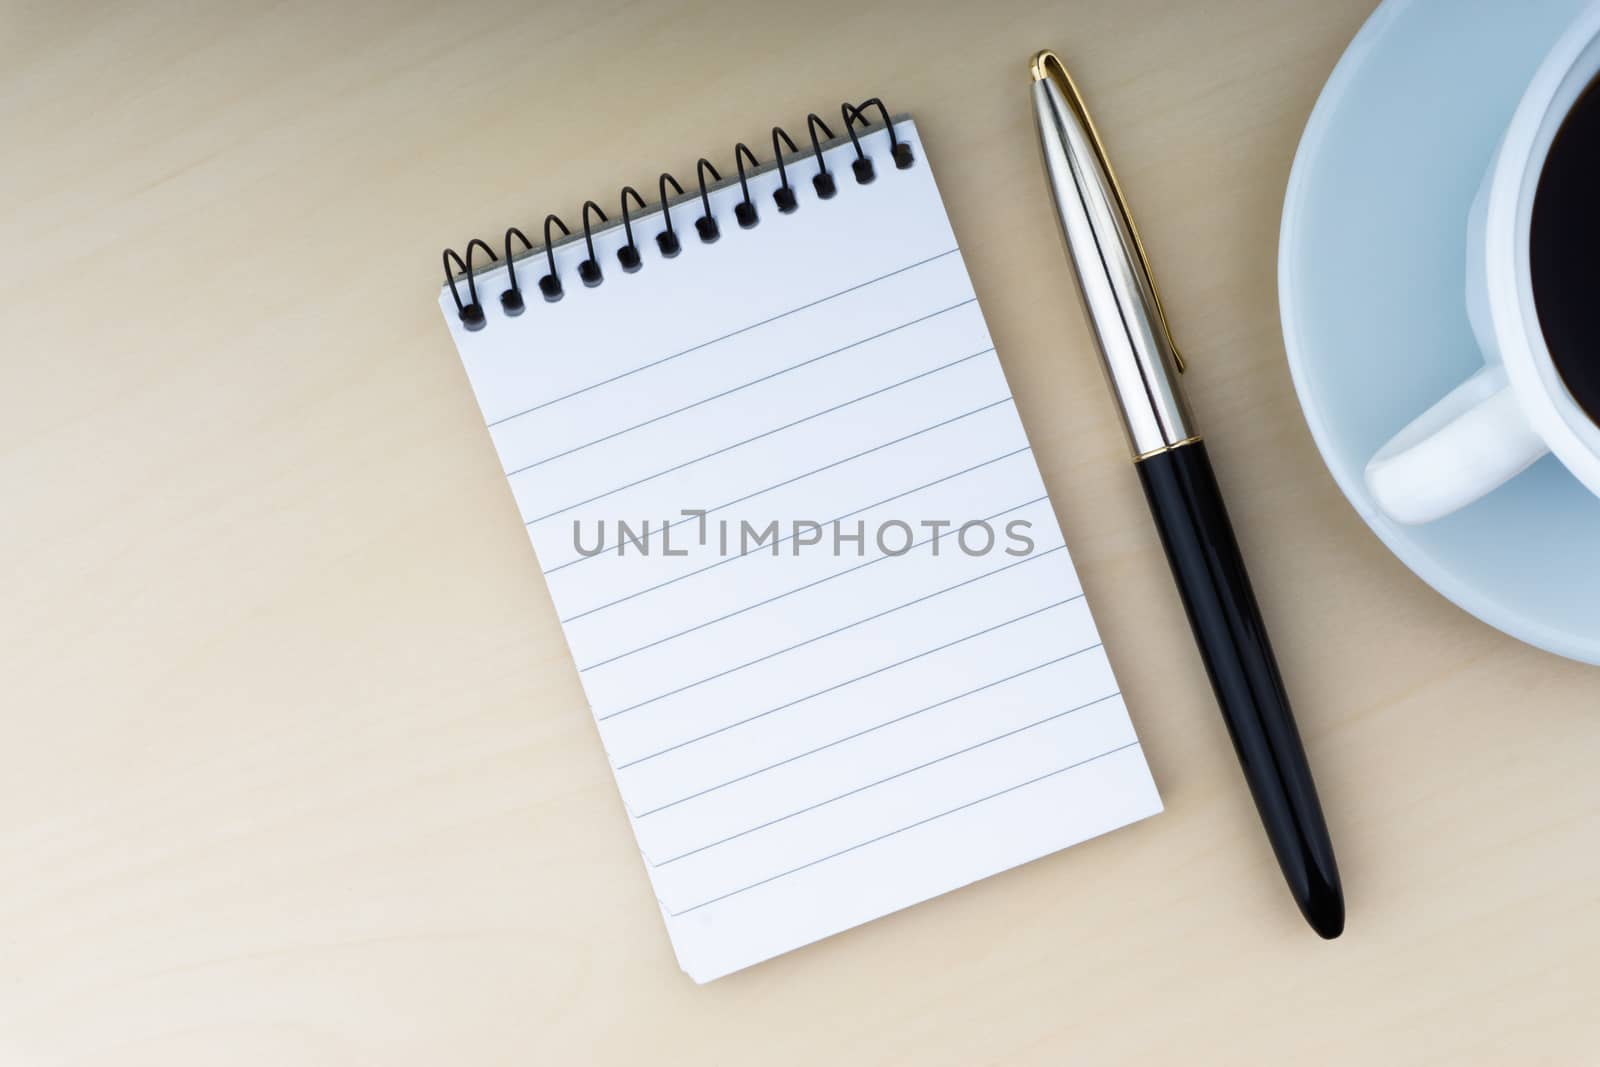 Fountain pen, notepad and cup of coffee on wooden background. Business and copy space concept.
 by silverwings